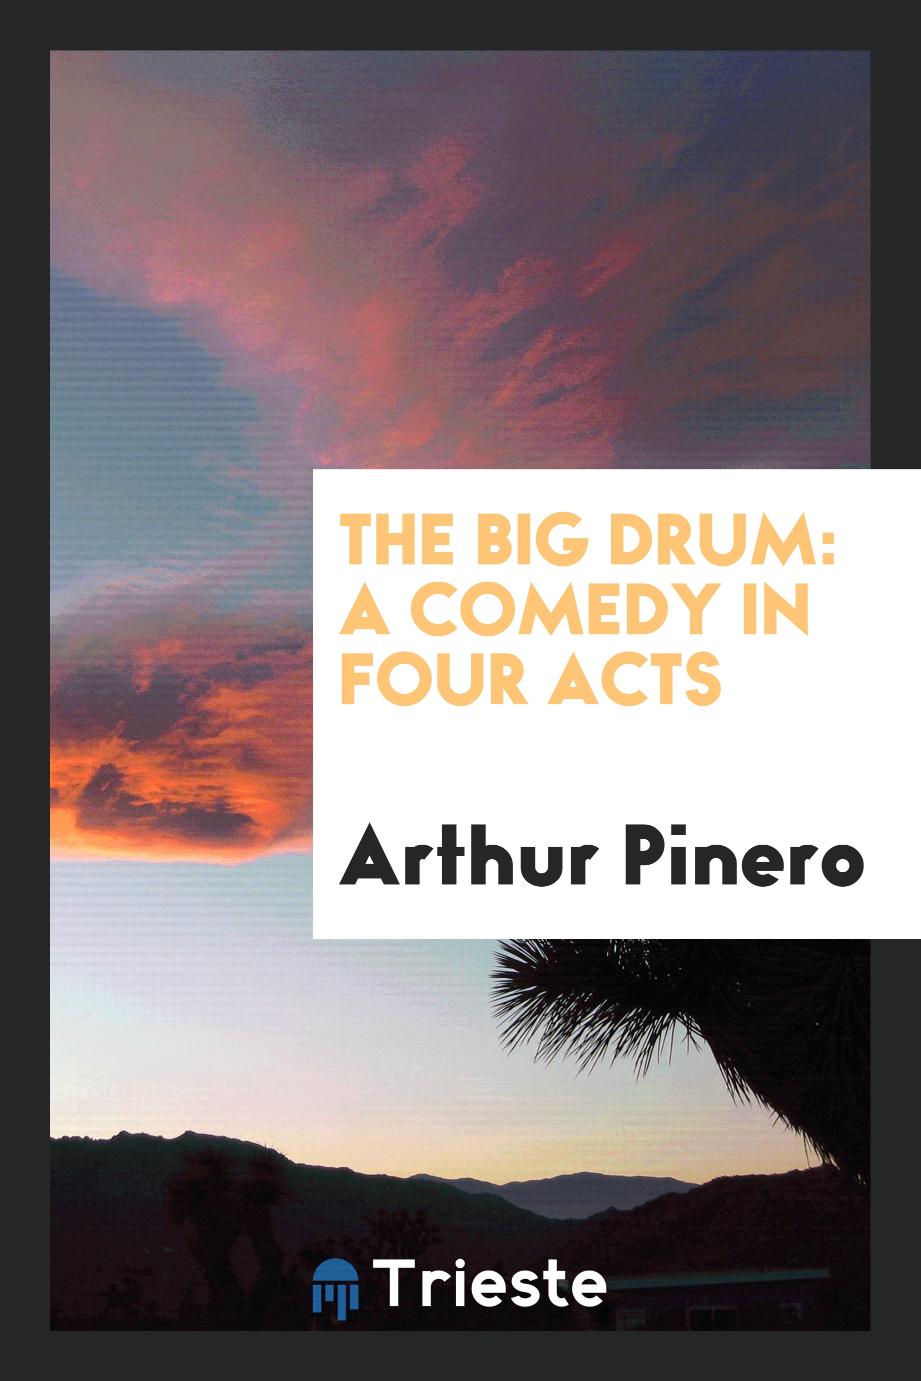 The big drum: a comedy in four acts